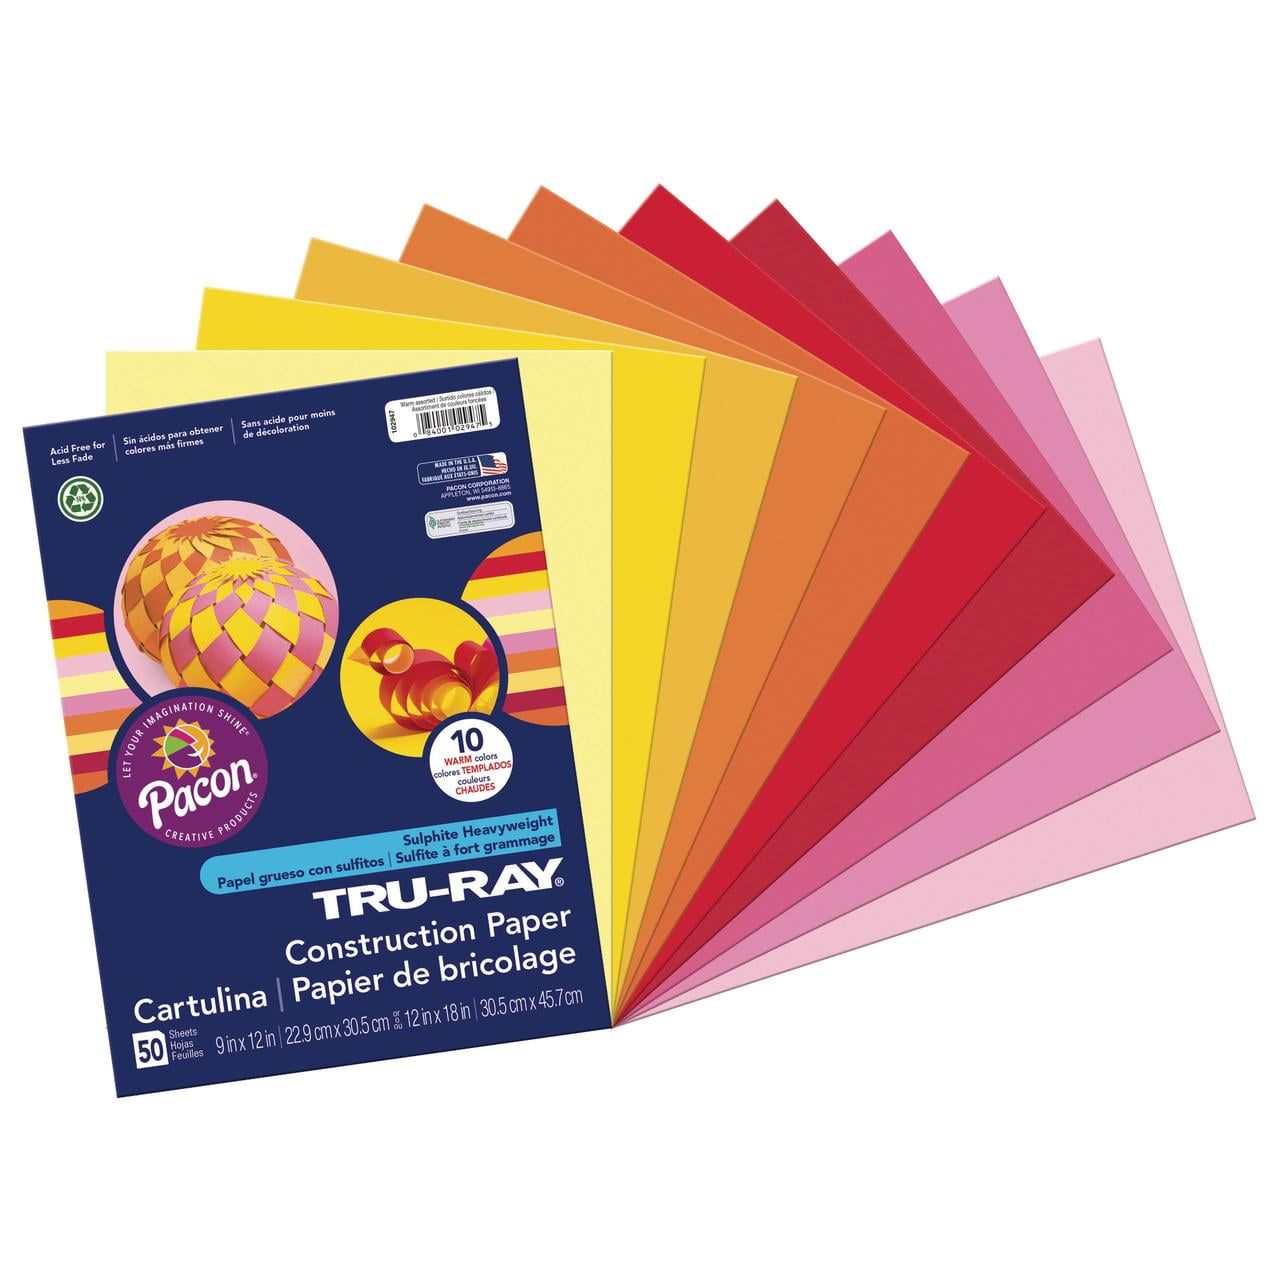 Tru-Ray Construction Paper, 70 lb Text Weight, 9 x 12, Assorted Holiday Colors, 150/Pack